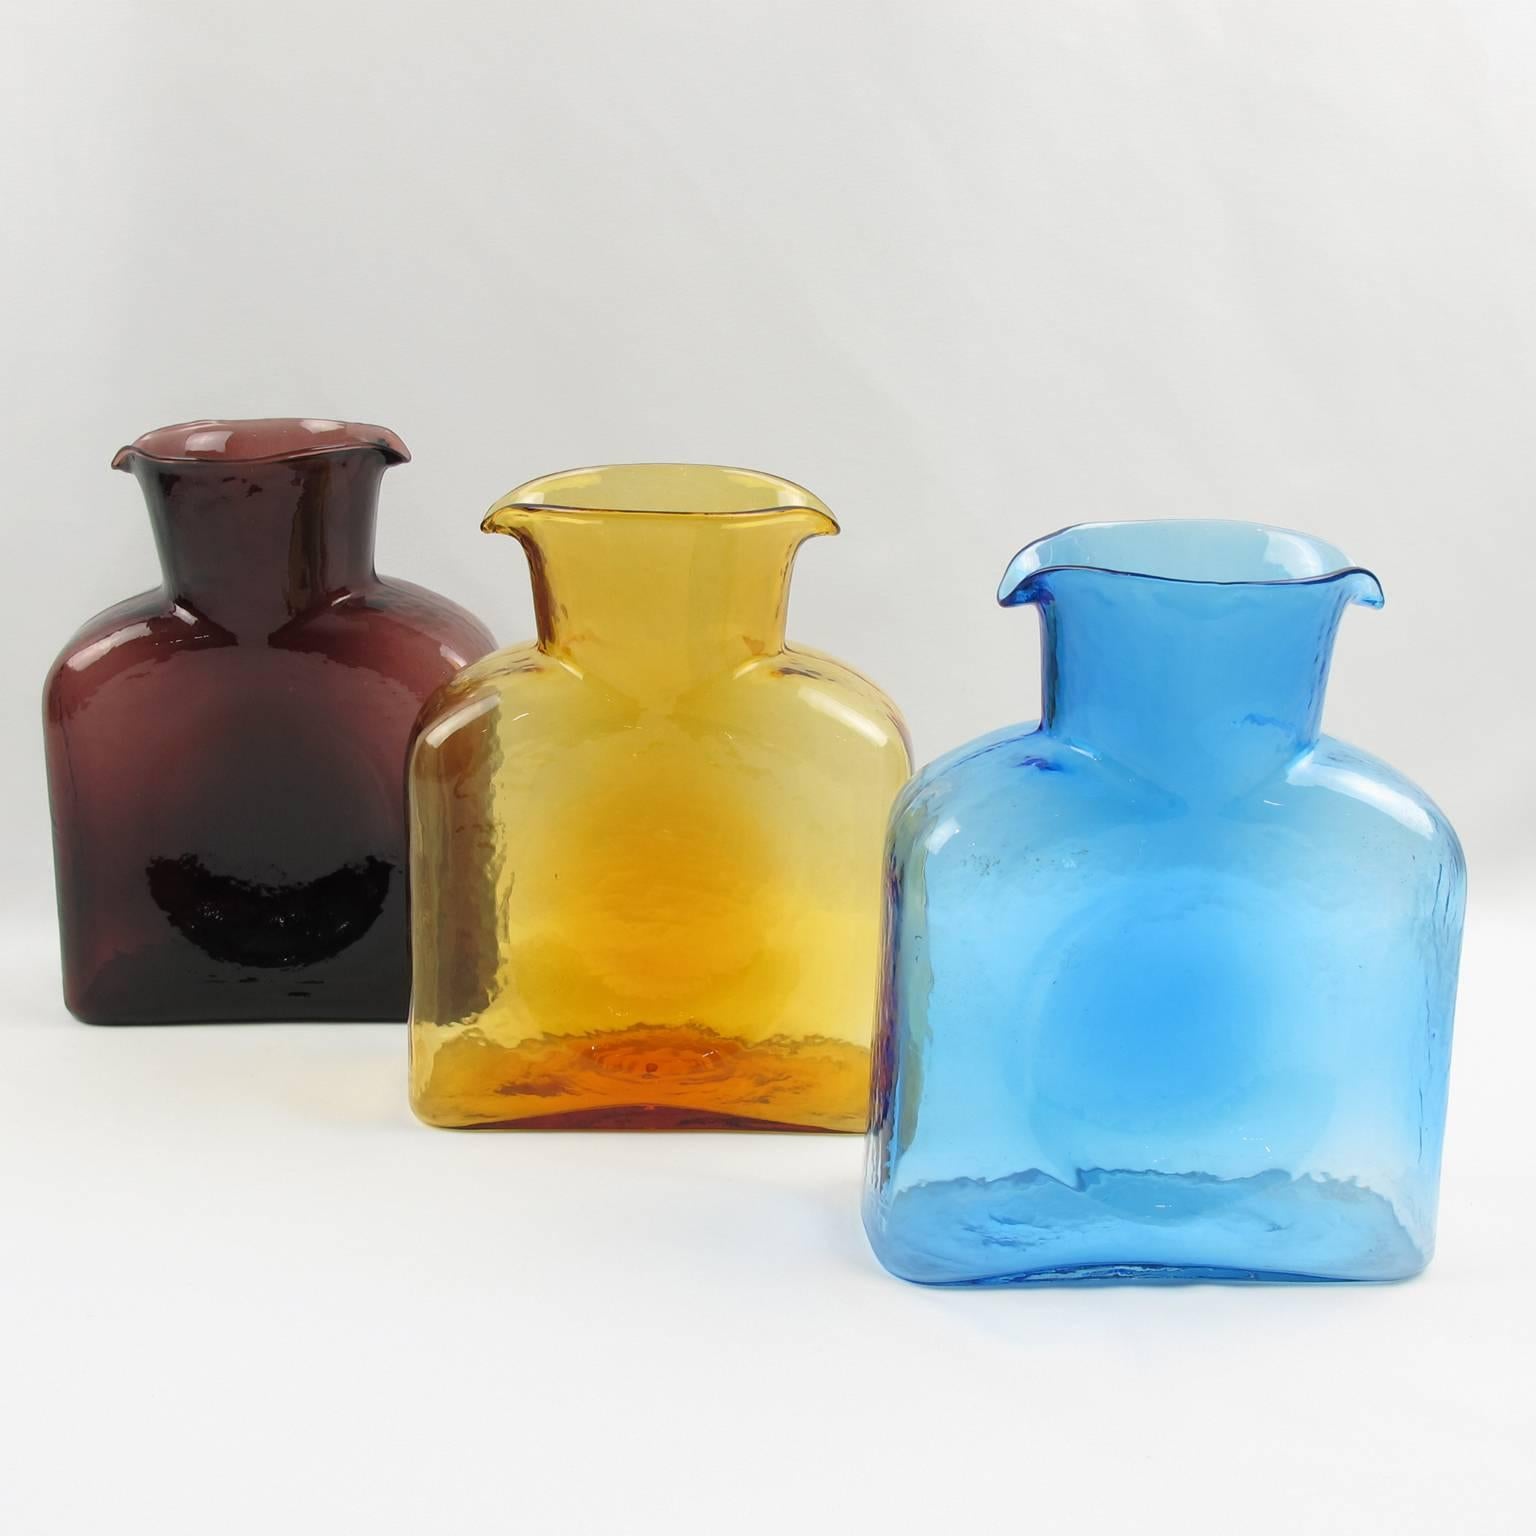 Lovely vintage set of three pitchers, jugs, decanters by Blenko Glass Manufacturer. Square geometric shape with double spouted design. Assorted colors of purple amethyst, orange amber and blue sky. The amber color has original etched Blenko marking